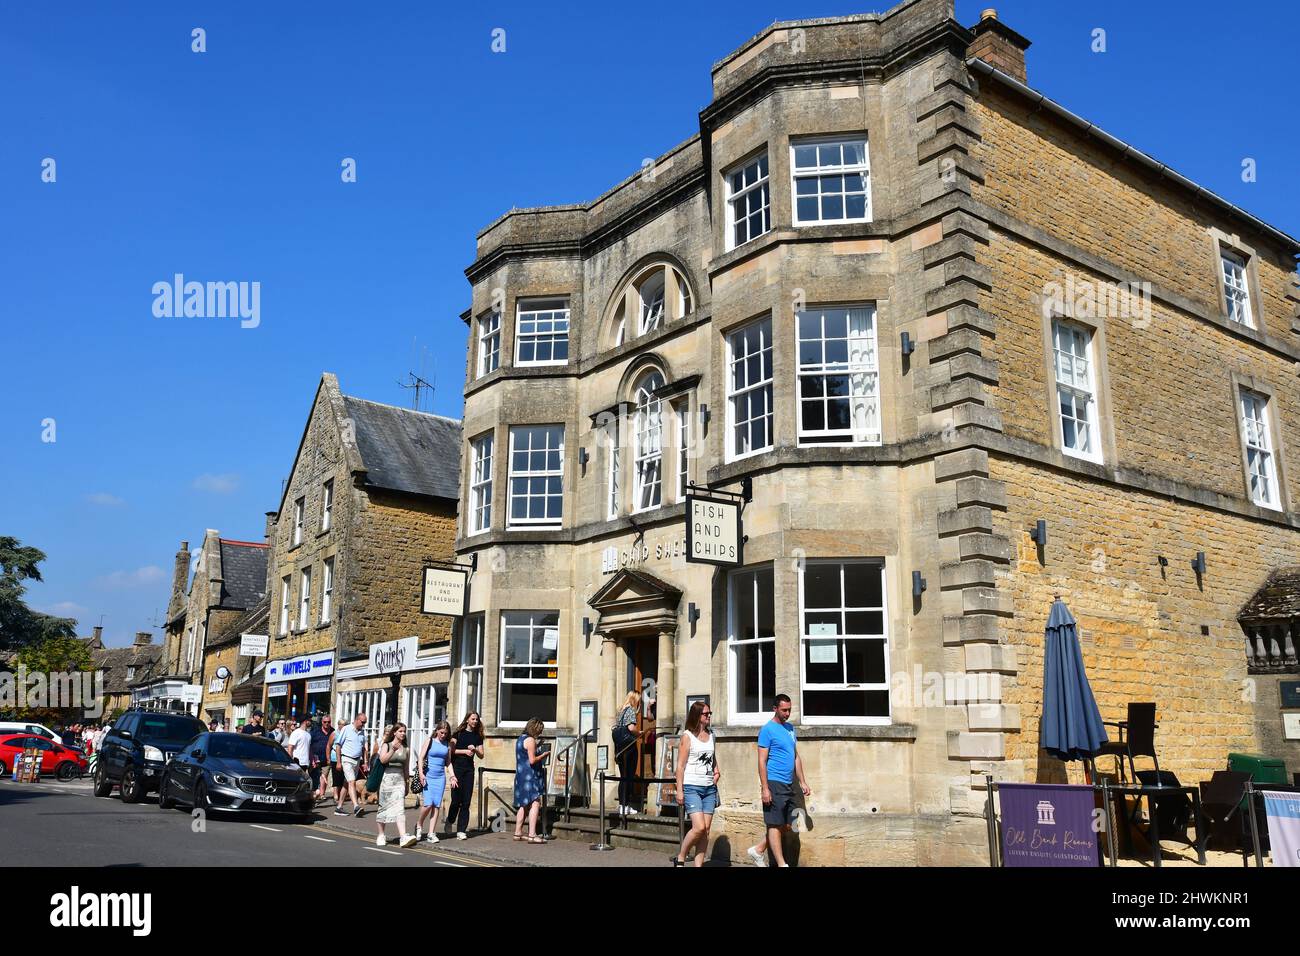 Bourton-on-the-water, Gloucestershire, Cotswolds, UK Stock Photo